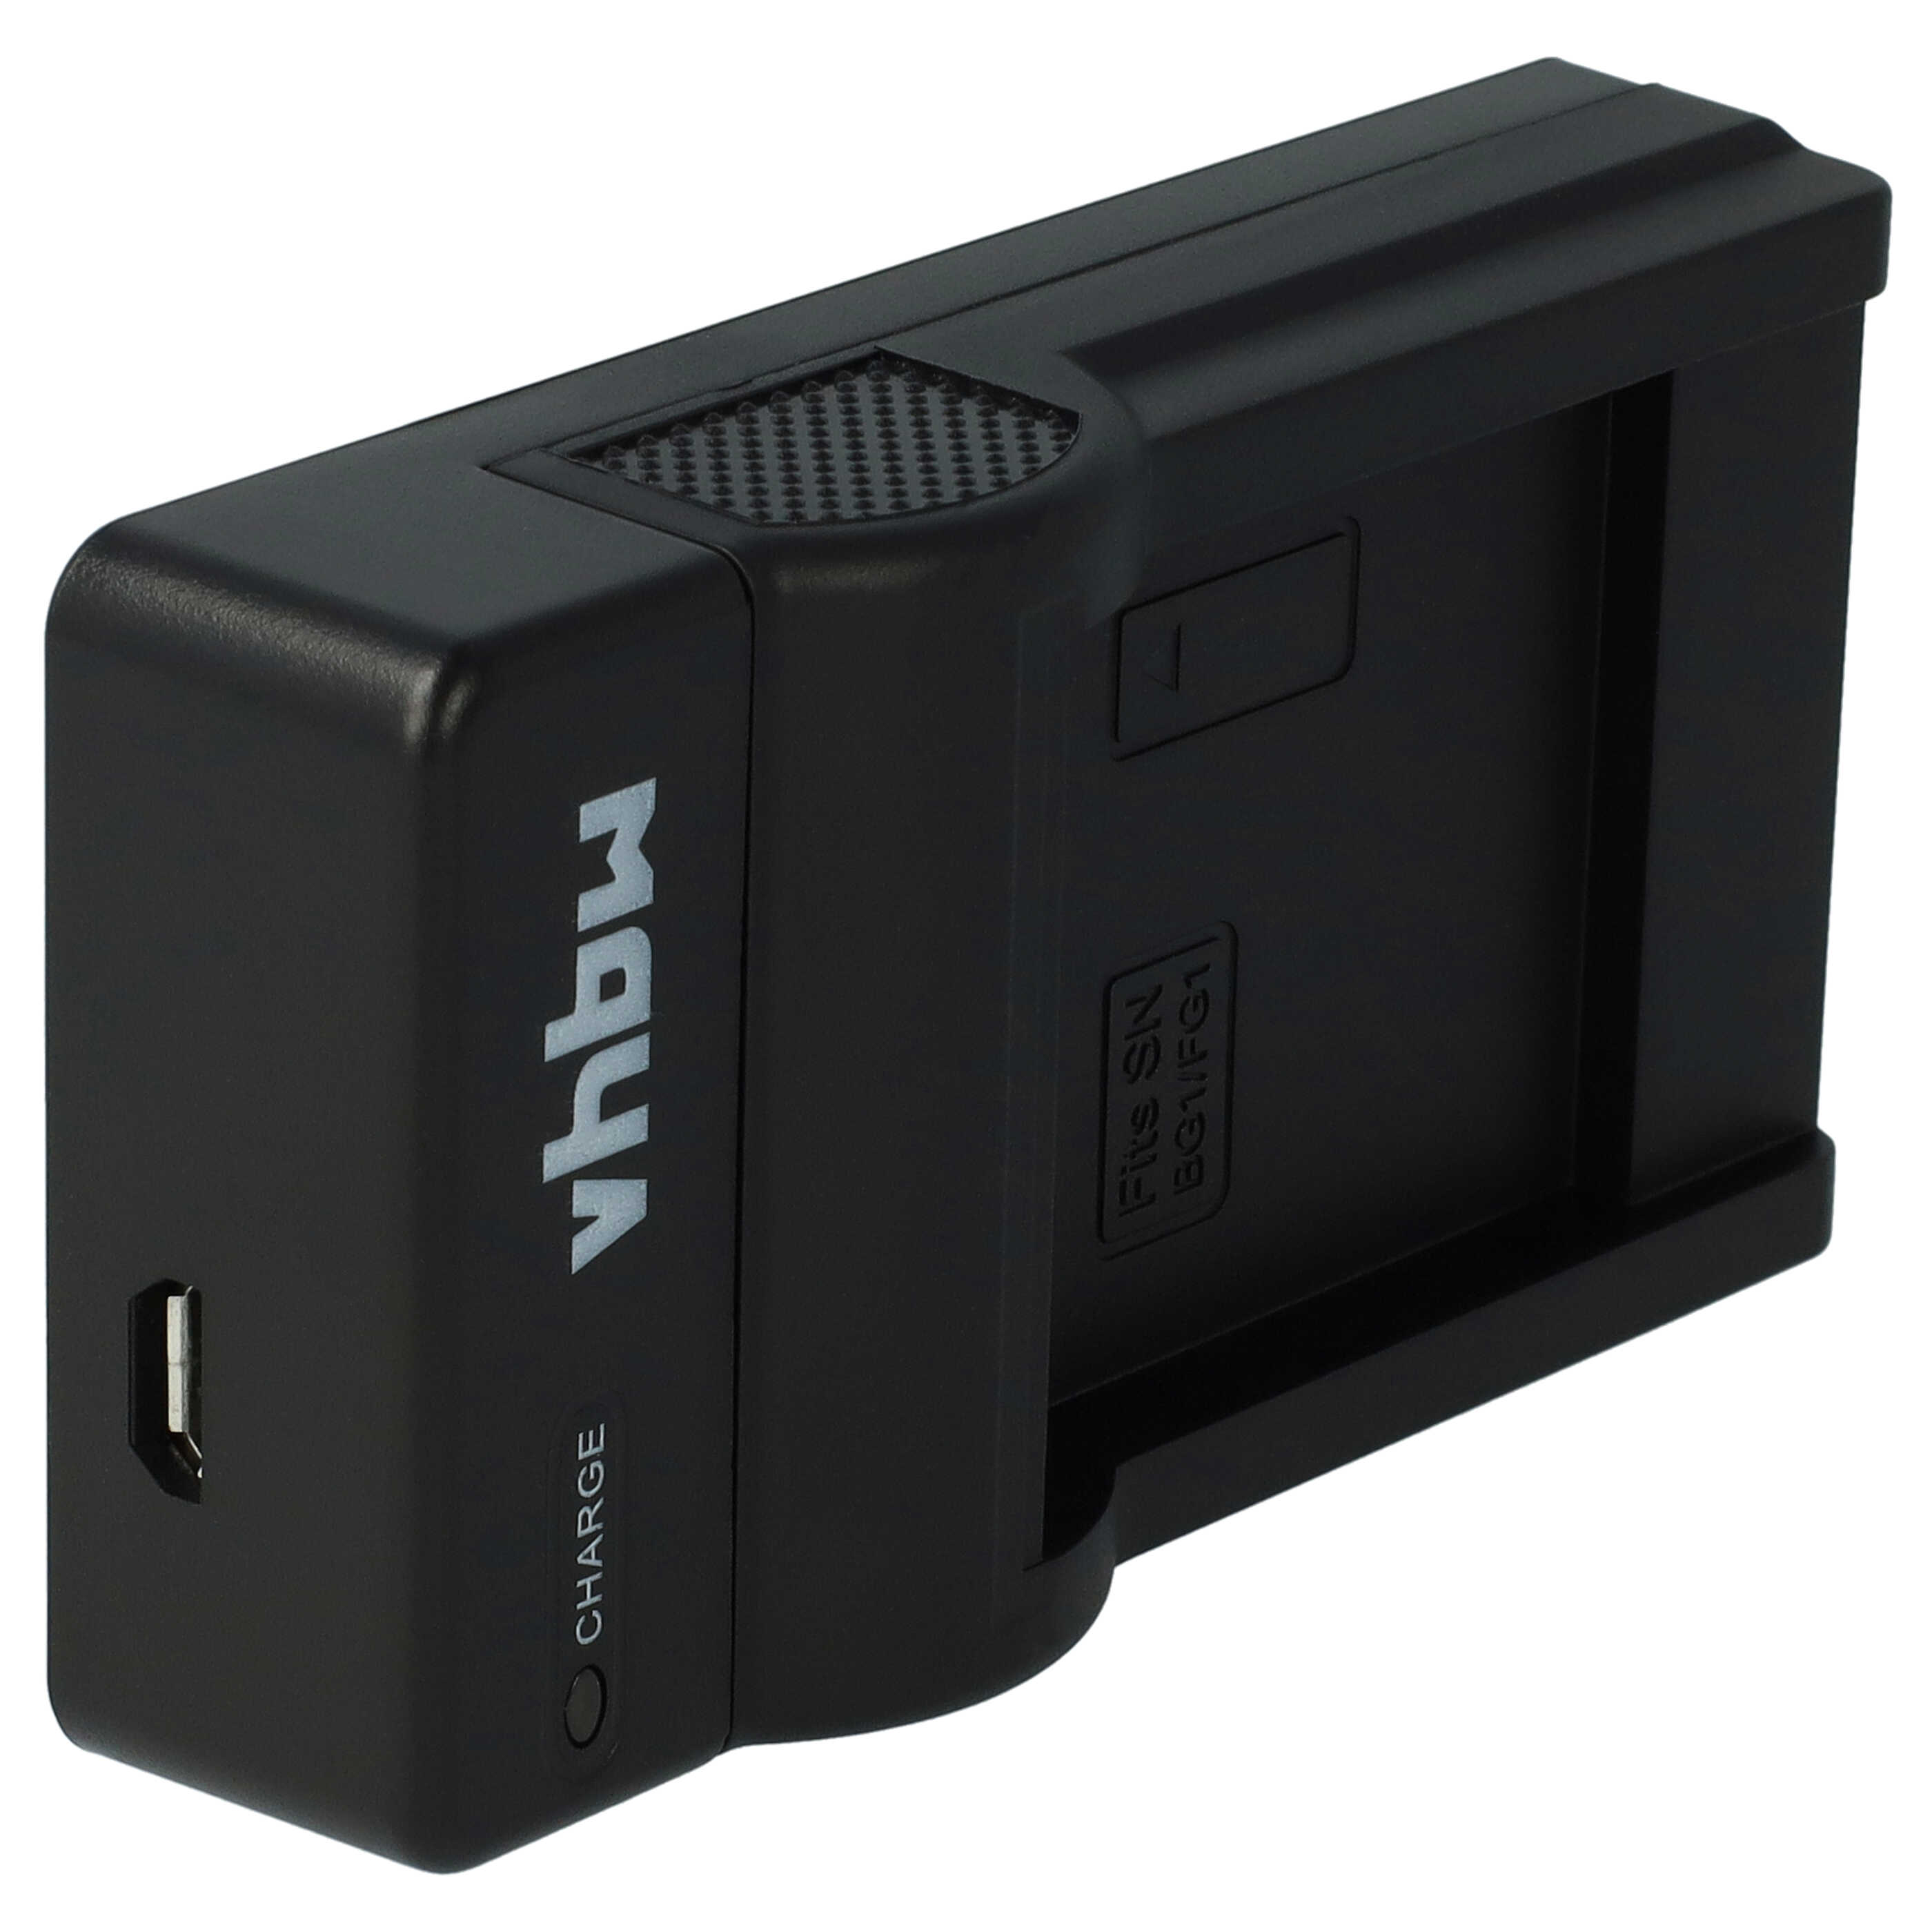 Battery Charger suitable for Sony NP-BG1 Camera etc. - 0.5 A